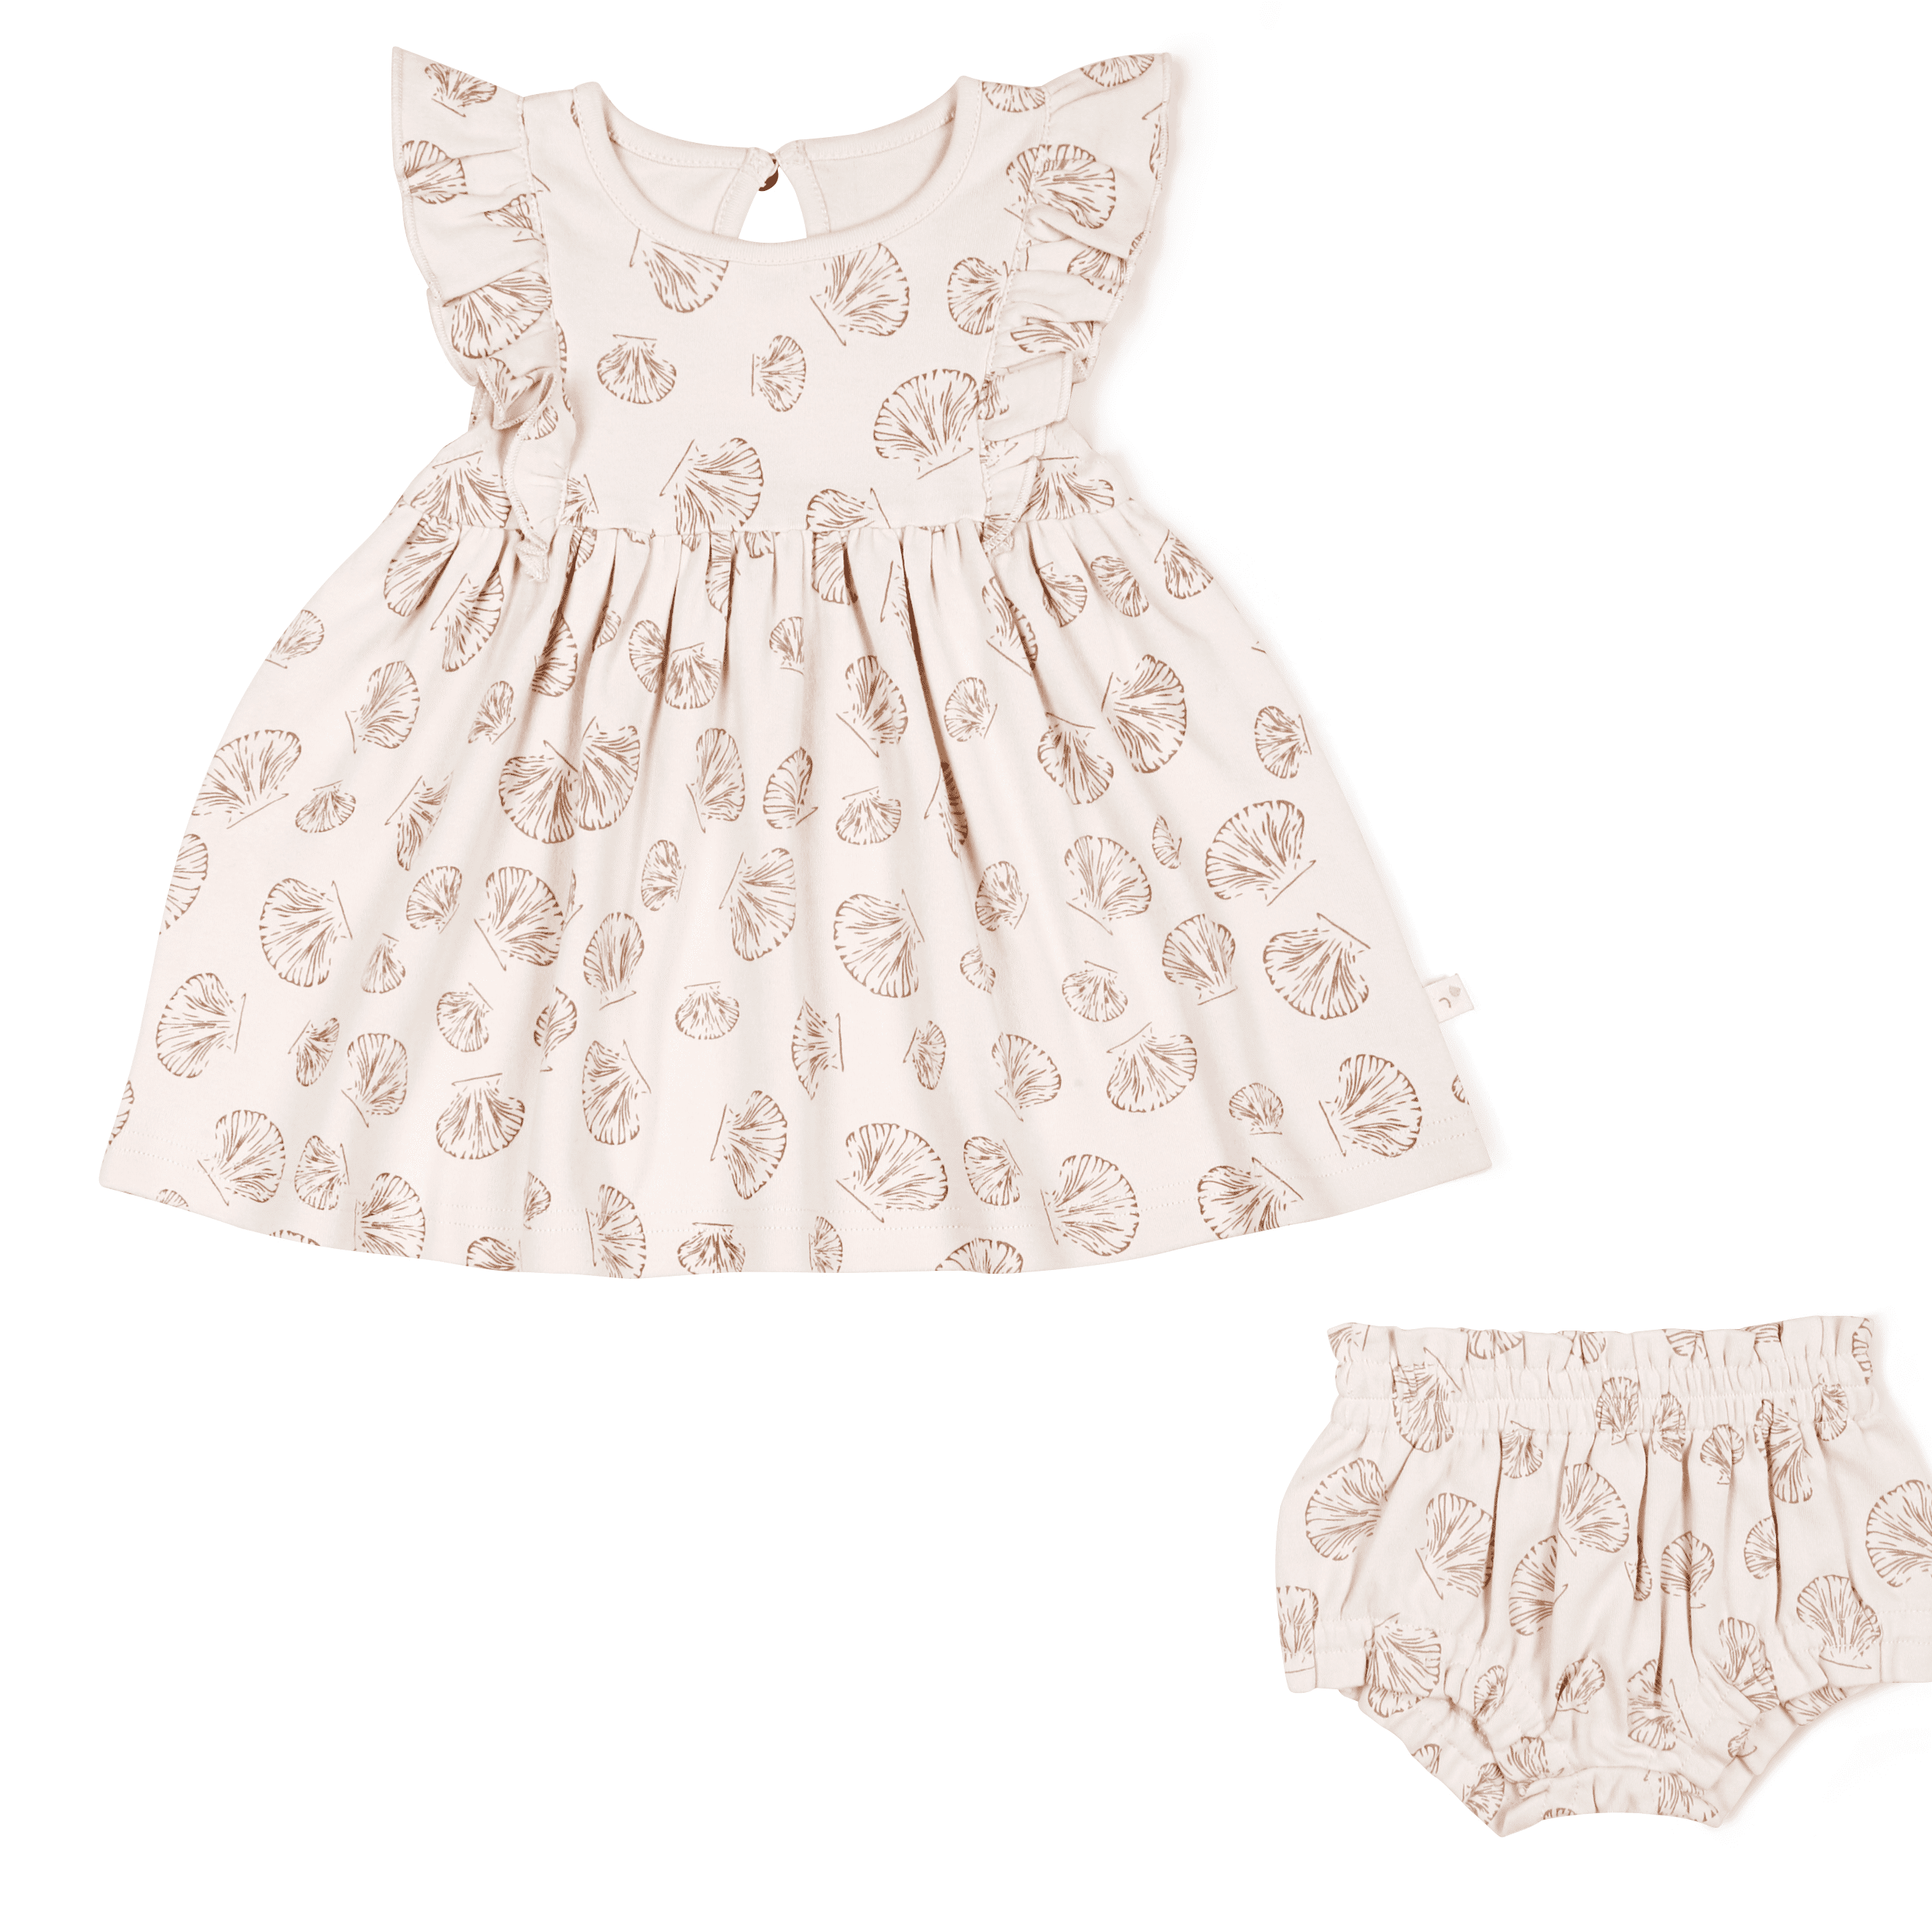 A beige toddler dress with a leaf pattern, featuring ruffled sleeves and a gathered waist, displayed alongside matching bloomers on a white background.